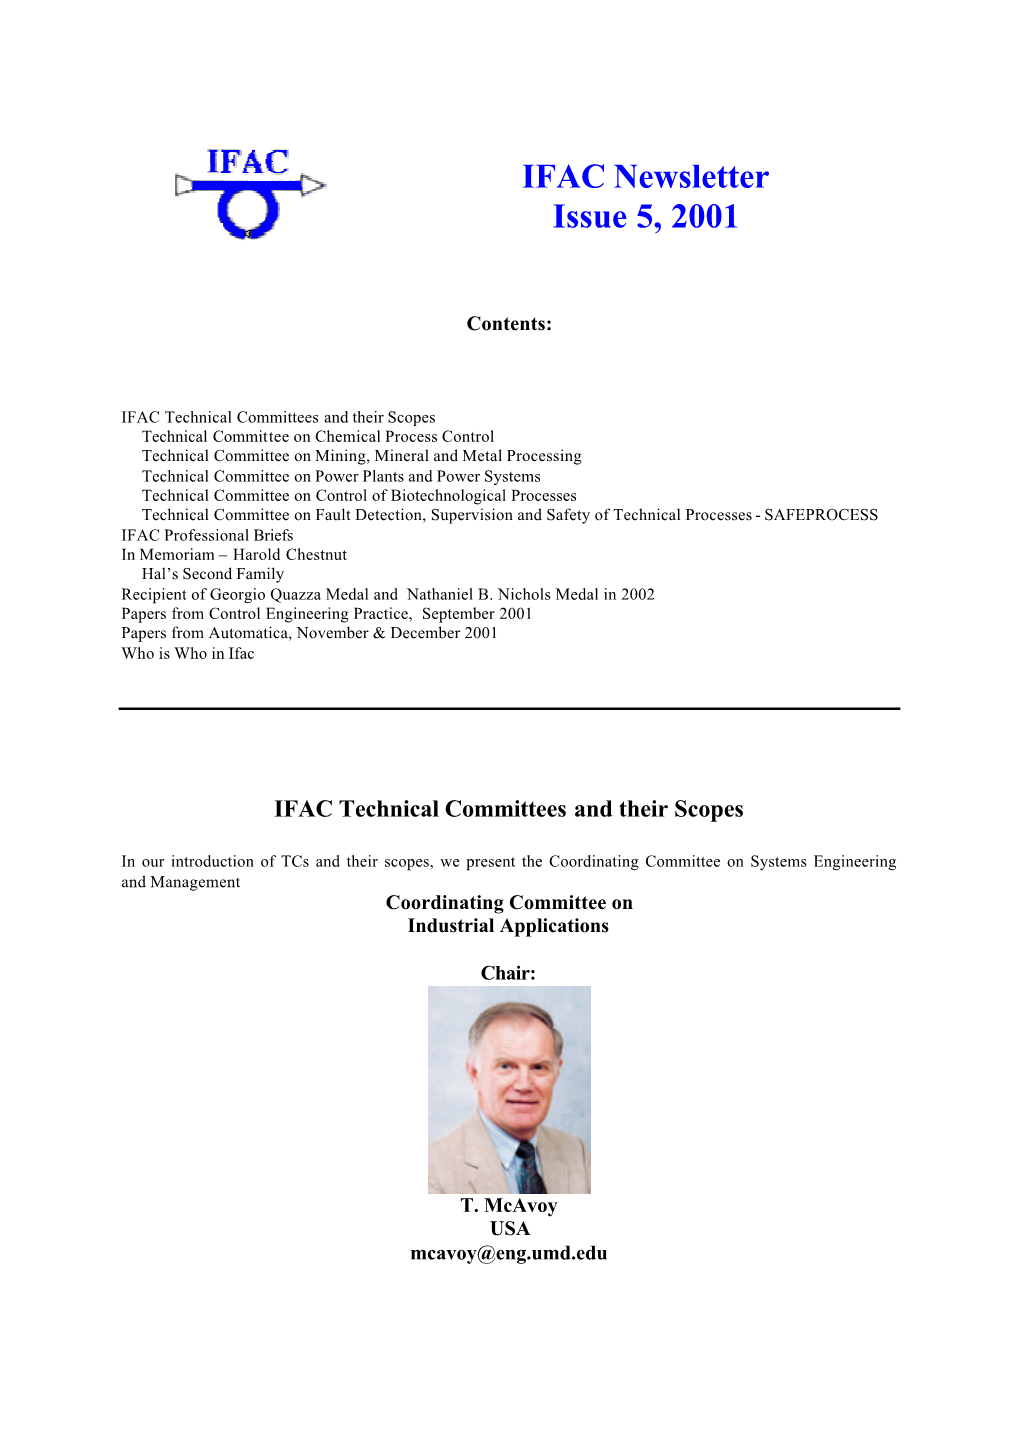 IFAC Newsletter Issue 5, 2001